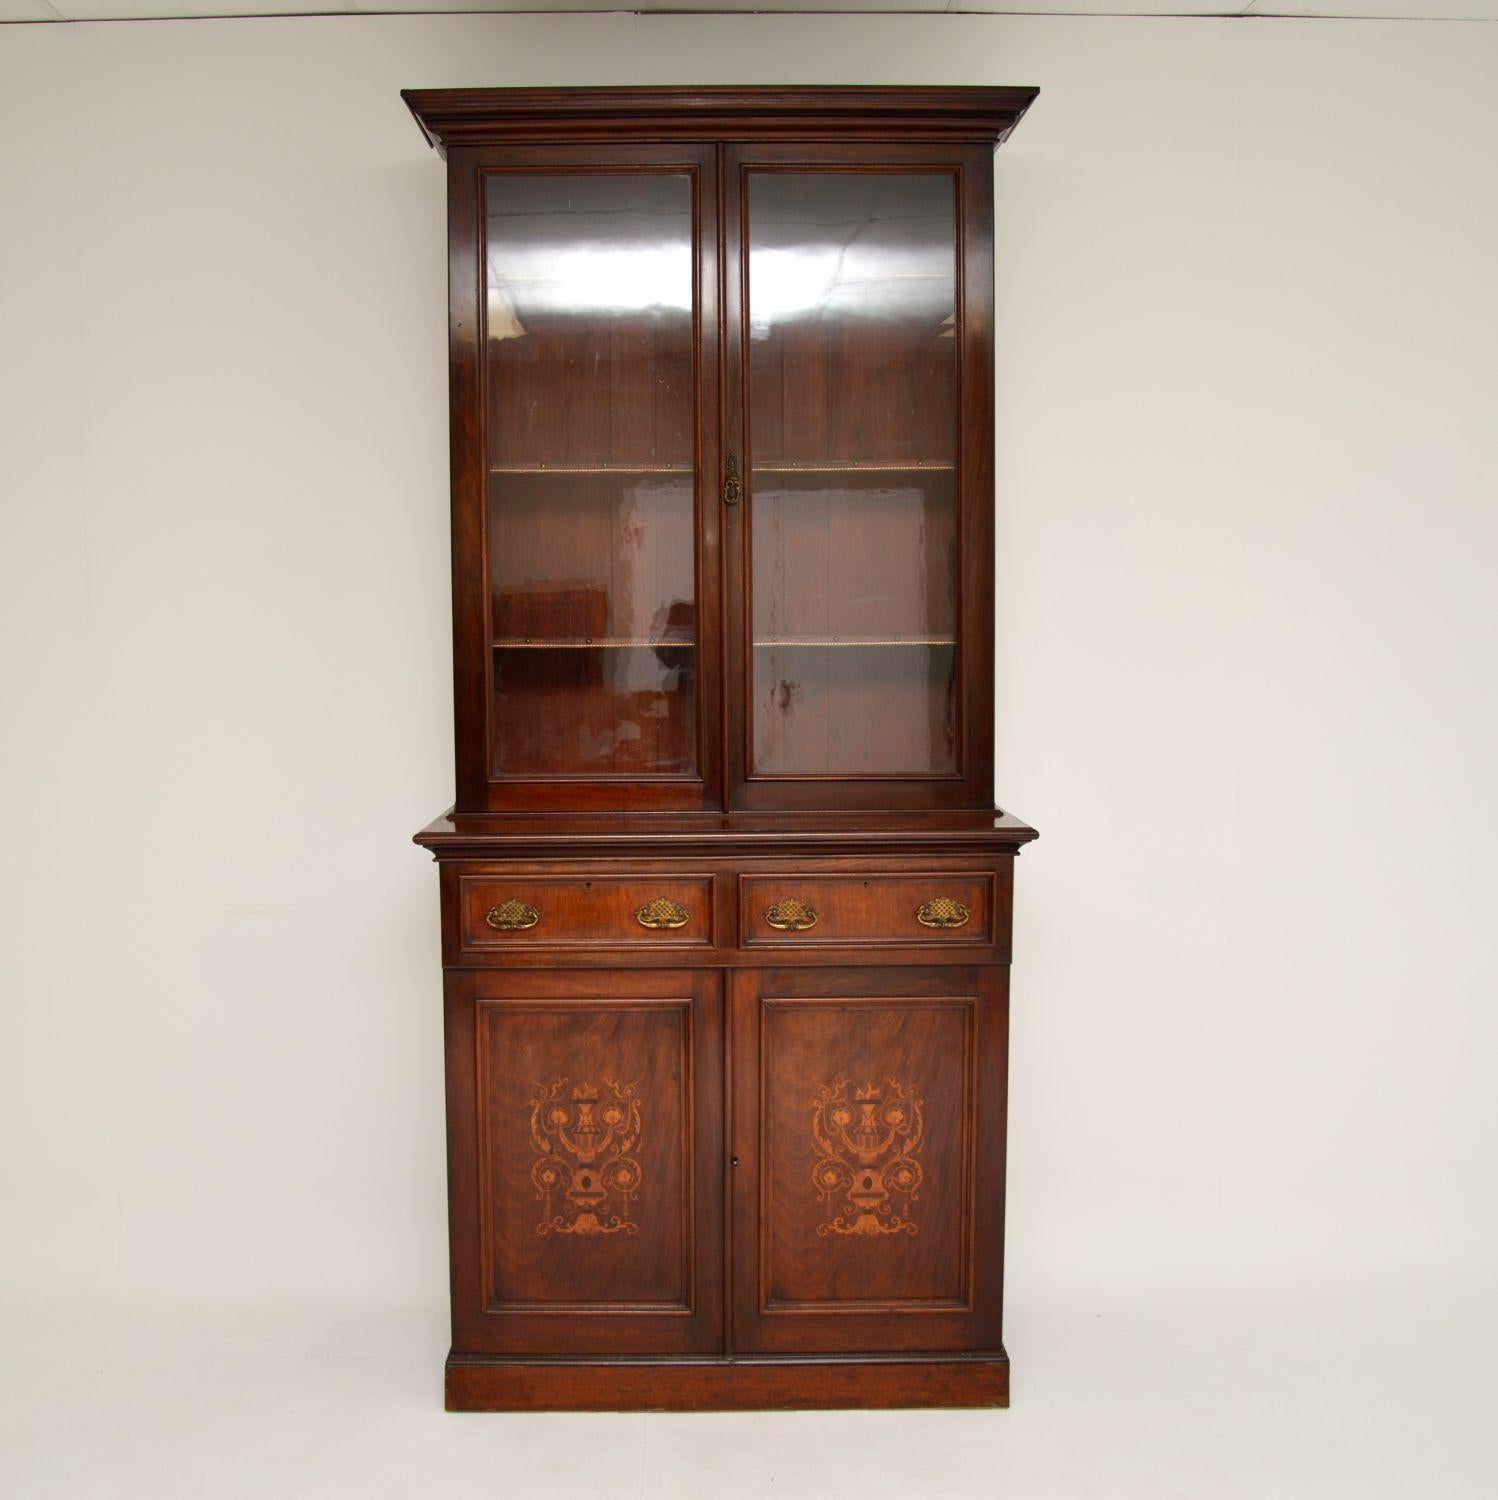 A very impressive antique bookcase, beautifully made from wood with satin wood Marquetry of classical design on the lower door panels. This dates from circa 1860s-1880s period.

It’s quite tall, and is of amazing quality. The upper cabinet has three